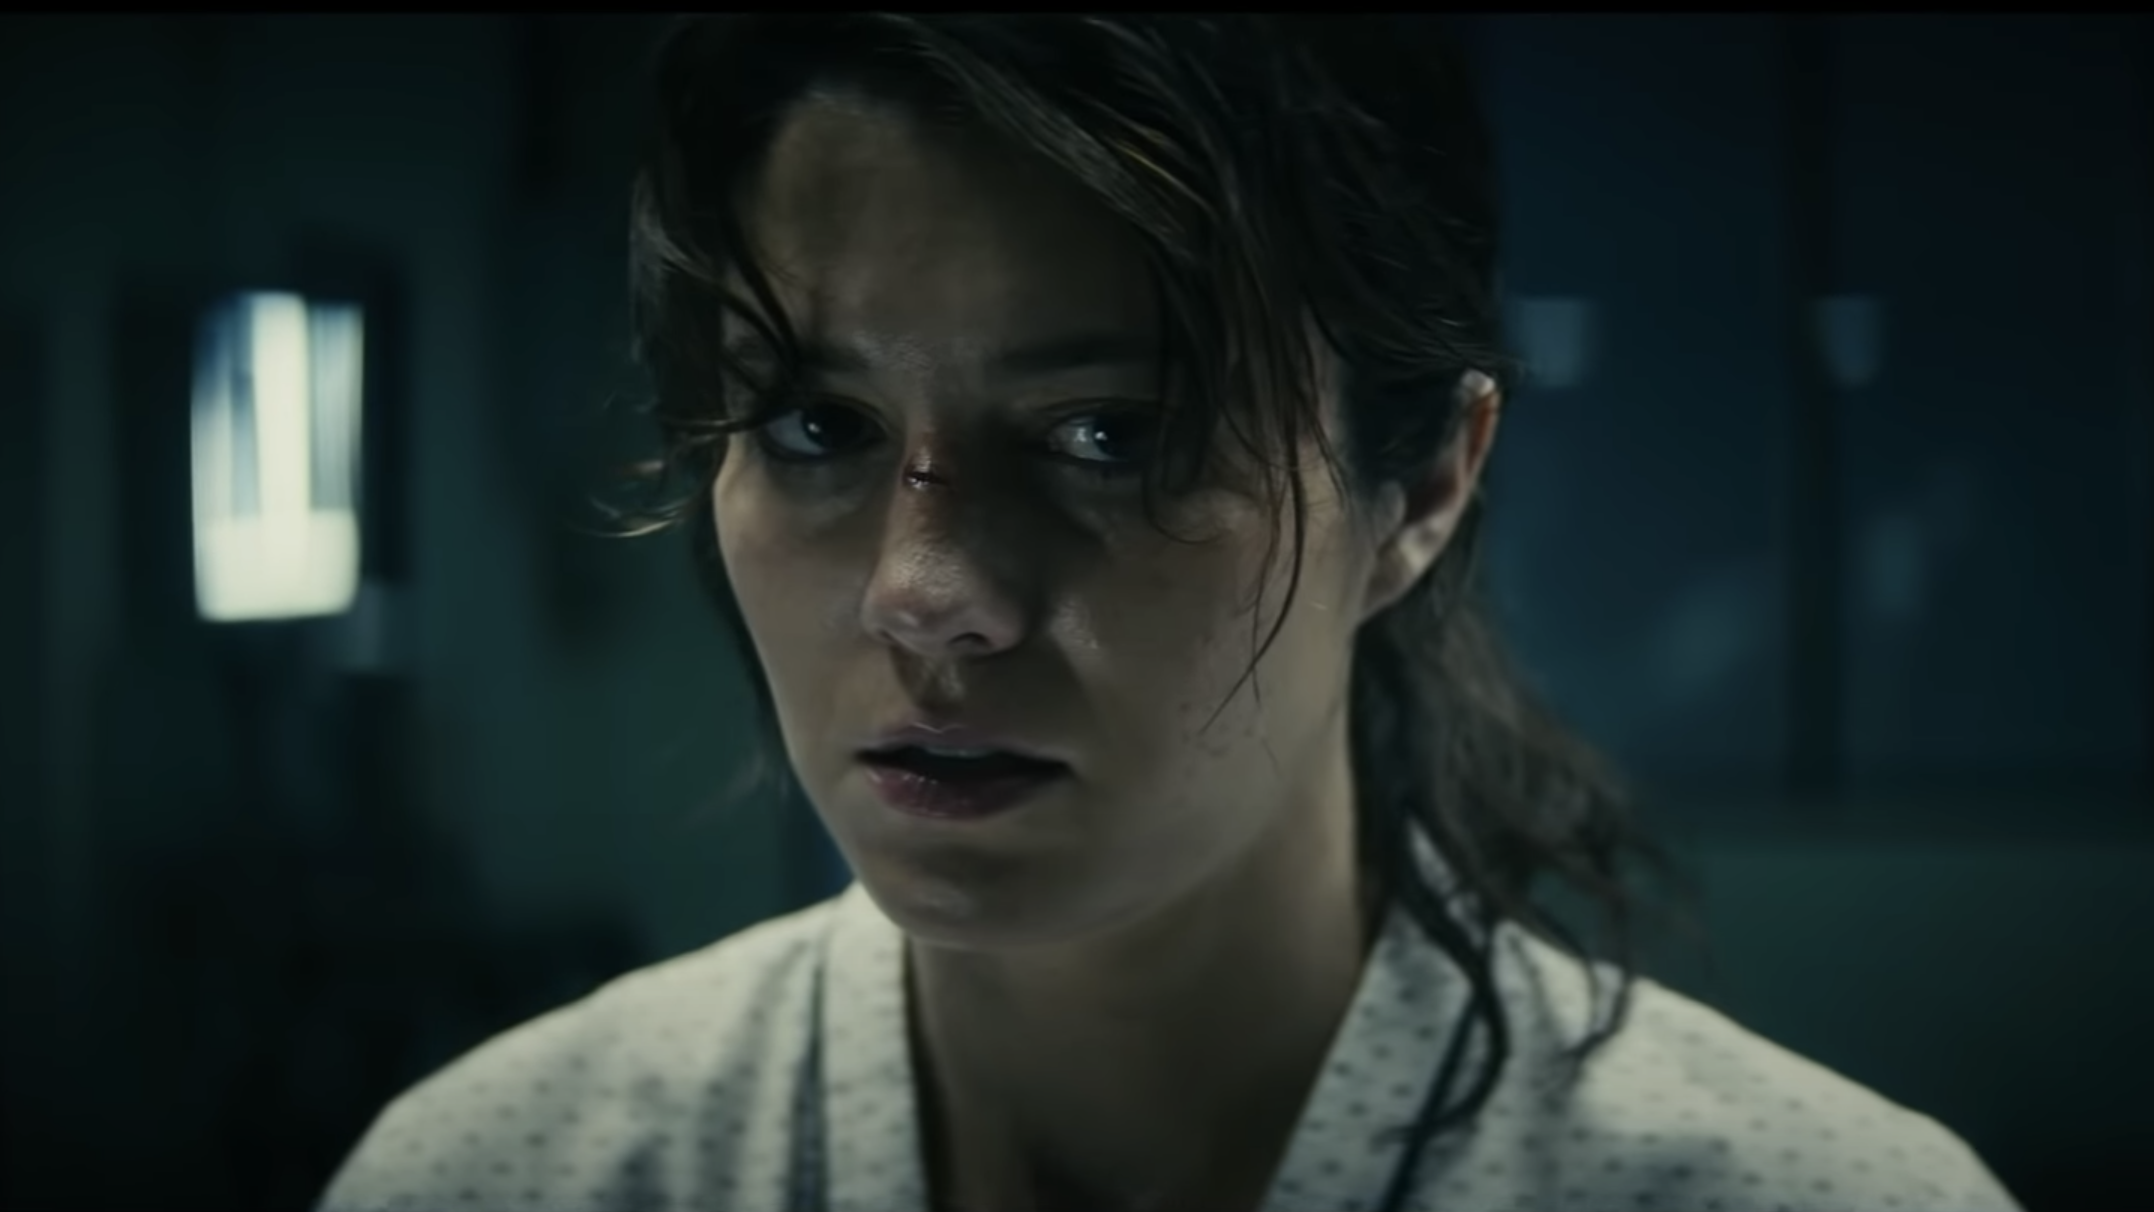 Mary Elizabeth Winstead is a ruthless assassin on a Tokyo-set hunt for revenge in Kate trailer